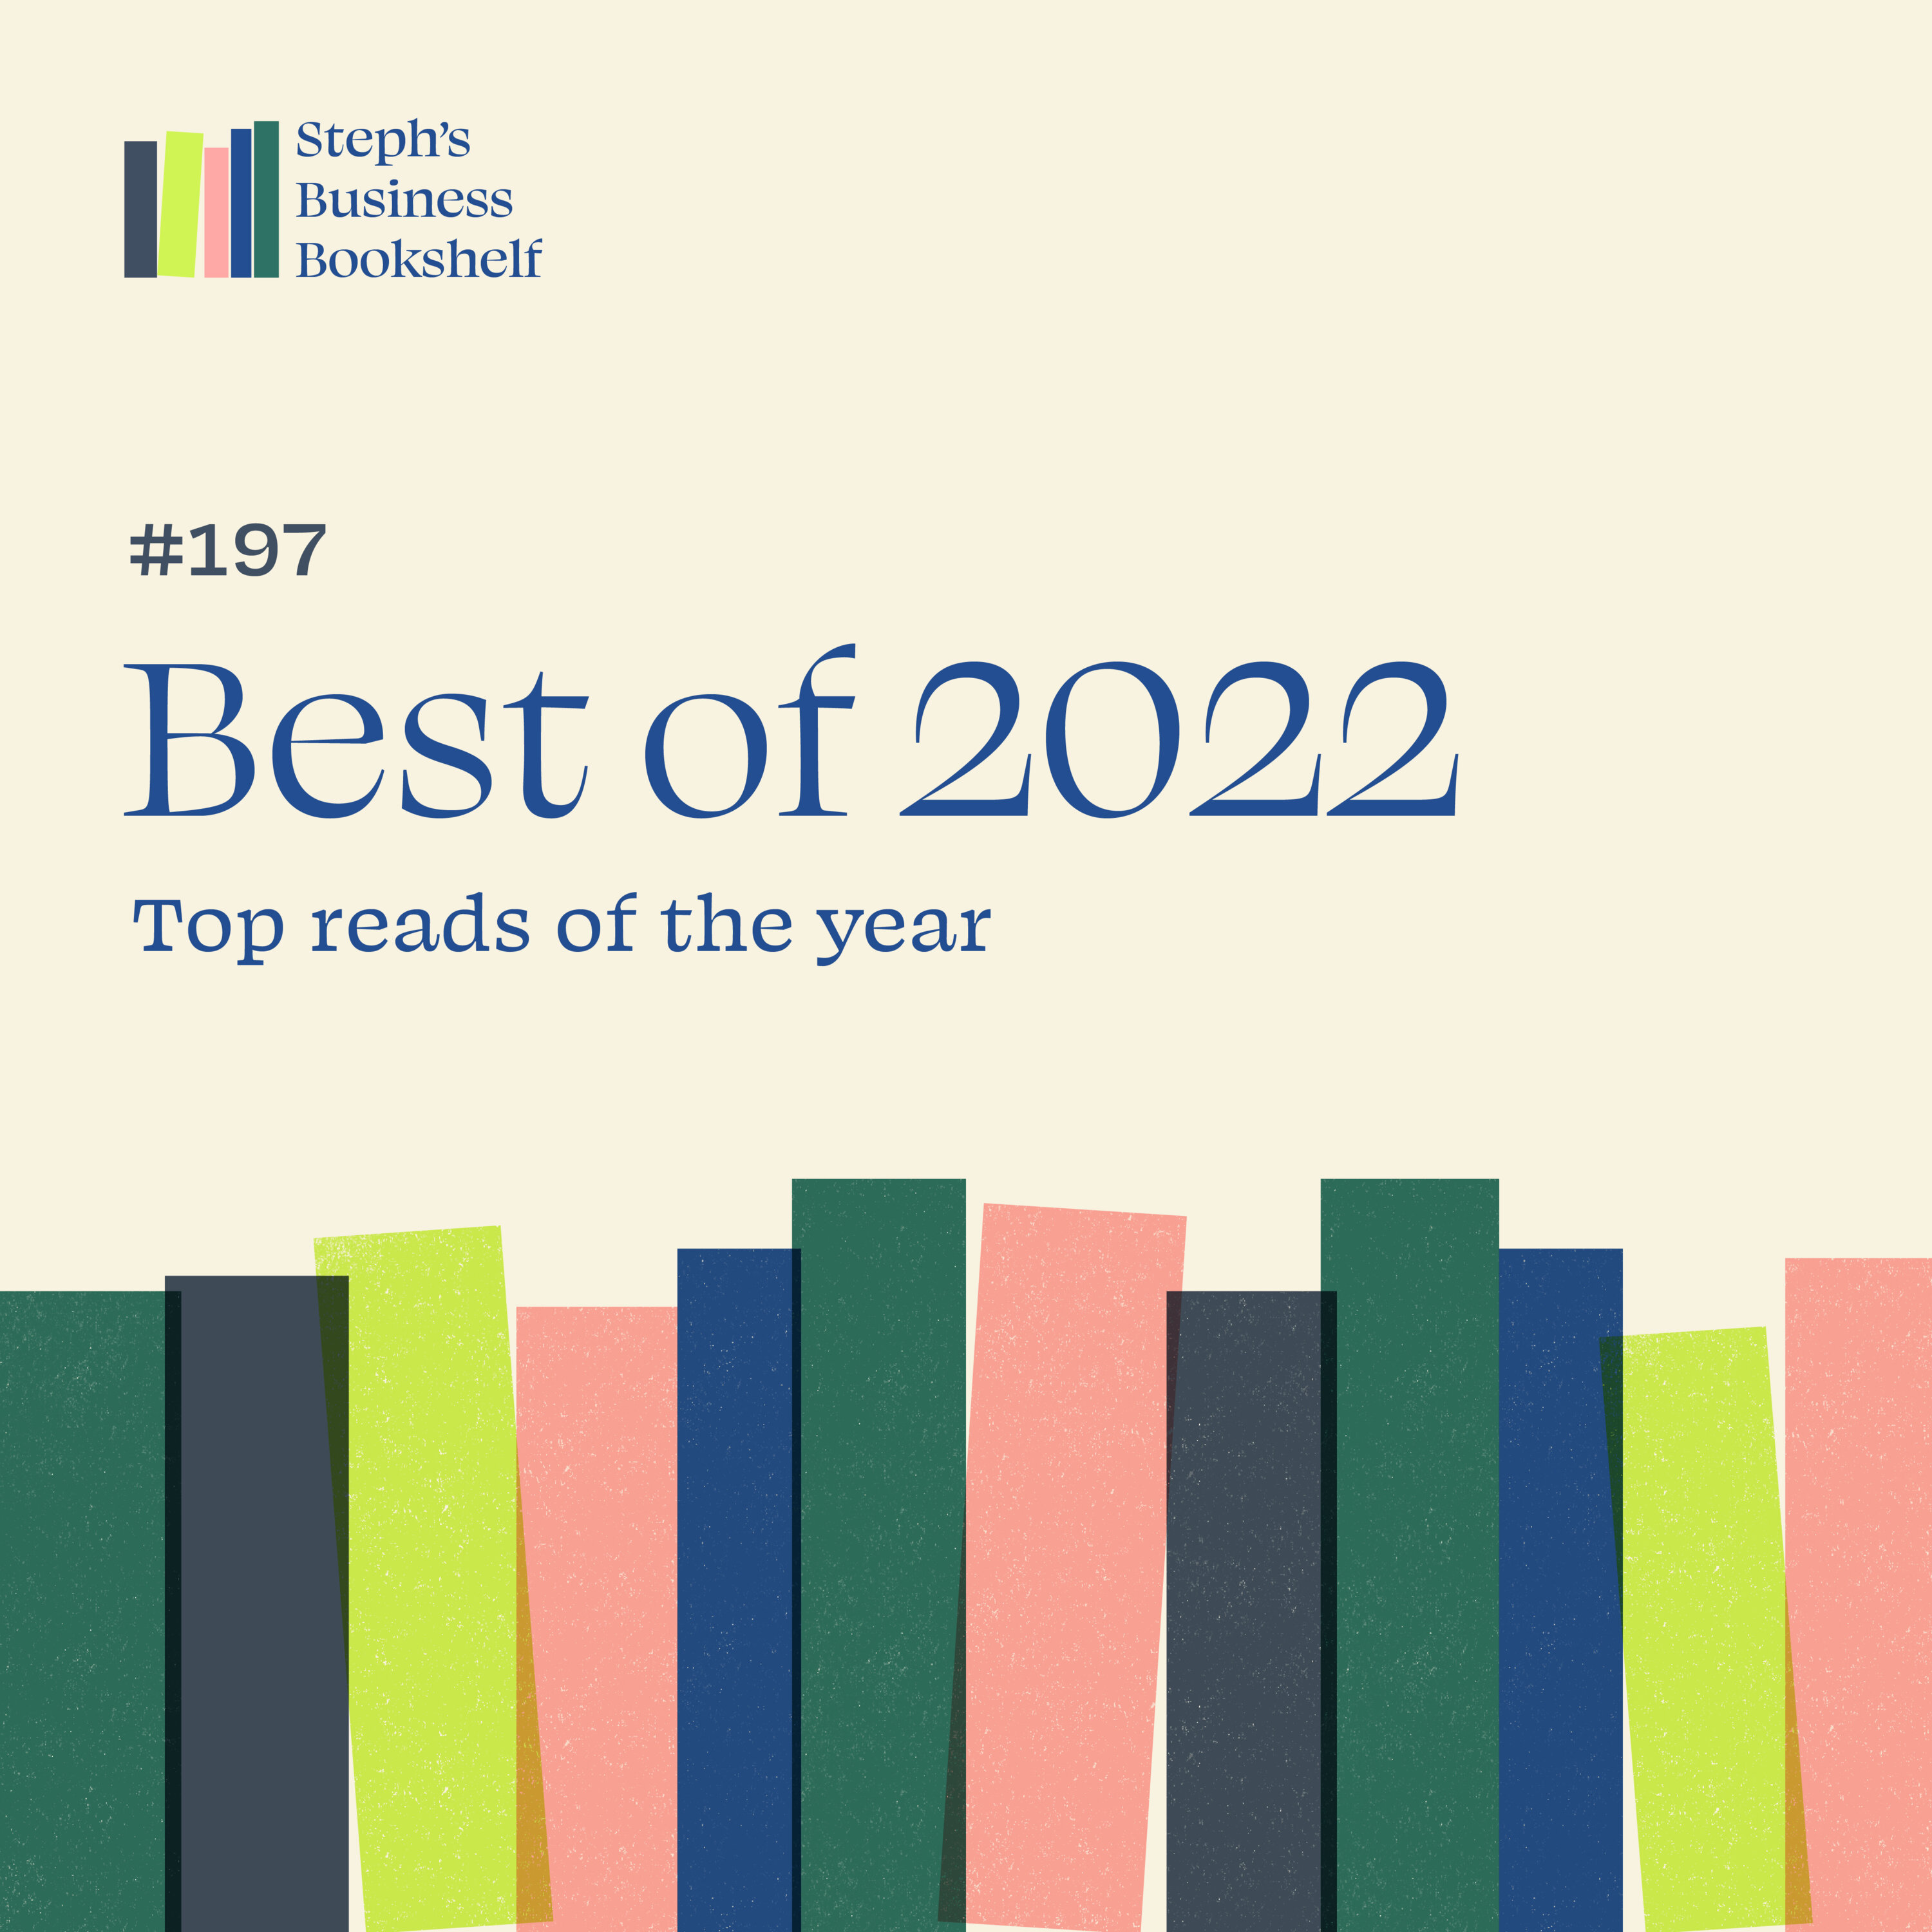 The best books I read in 2022